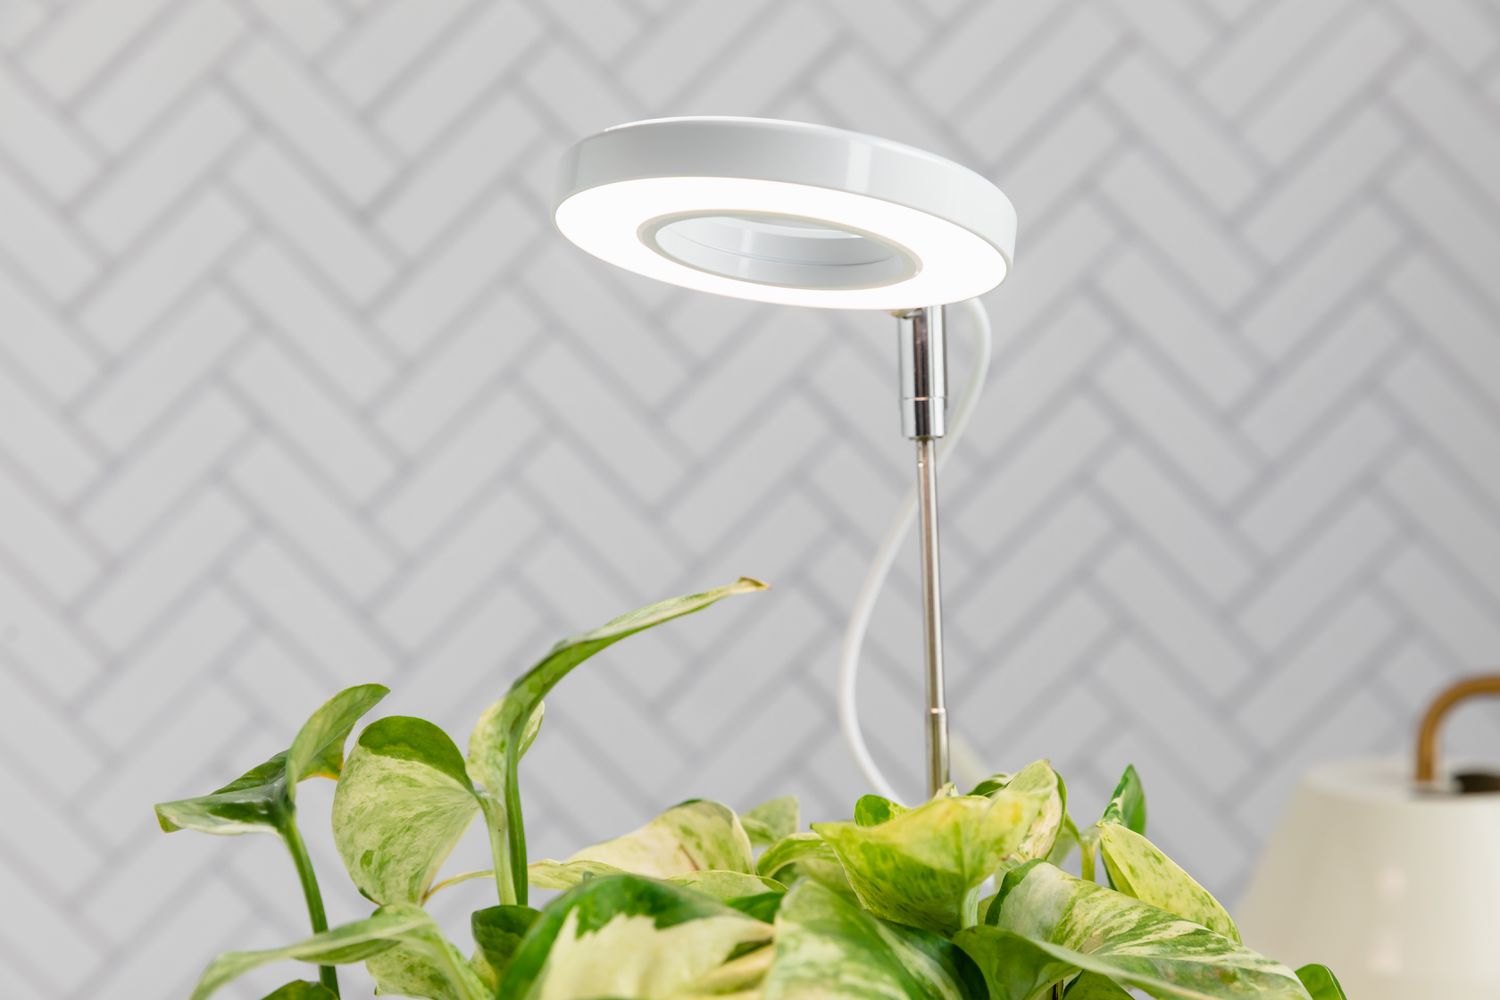 Circular grow light hovering above variegated pothos plant